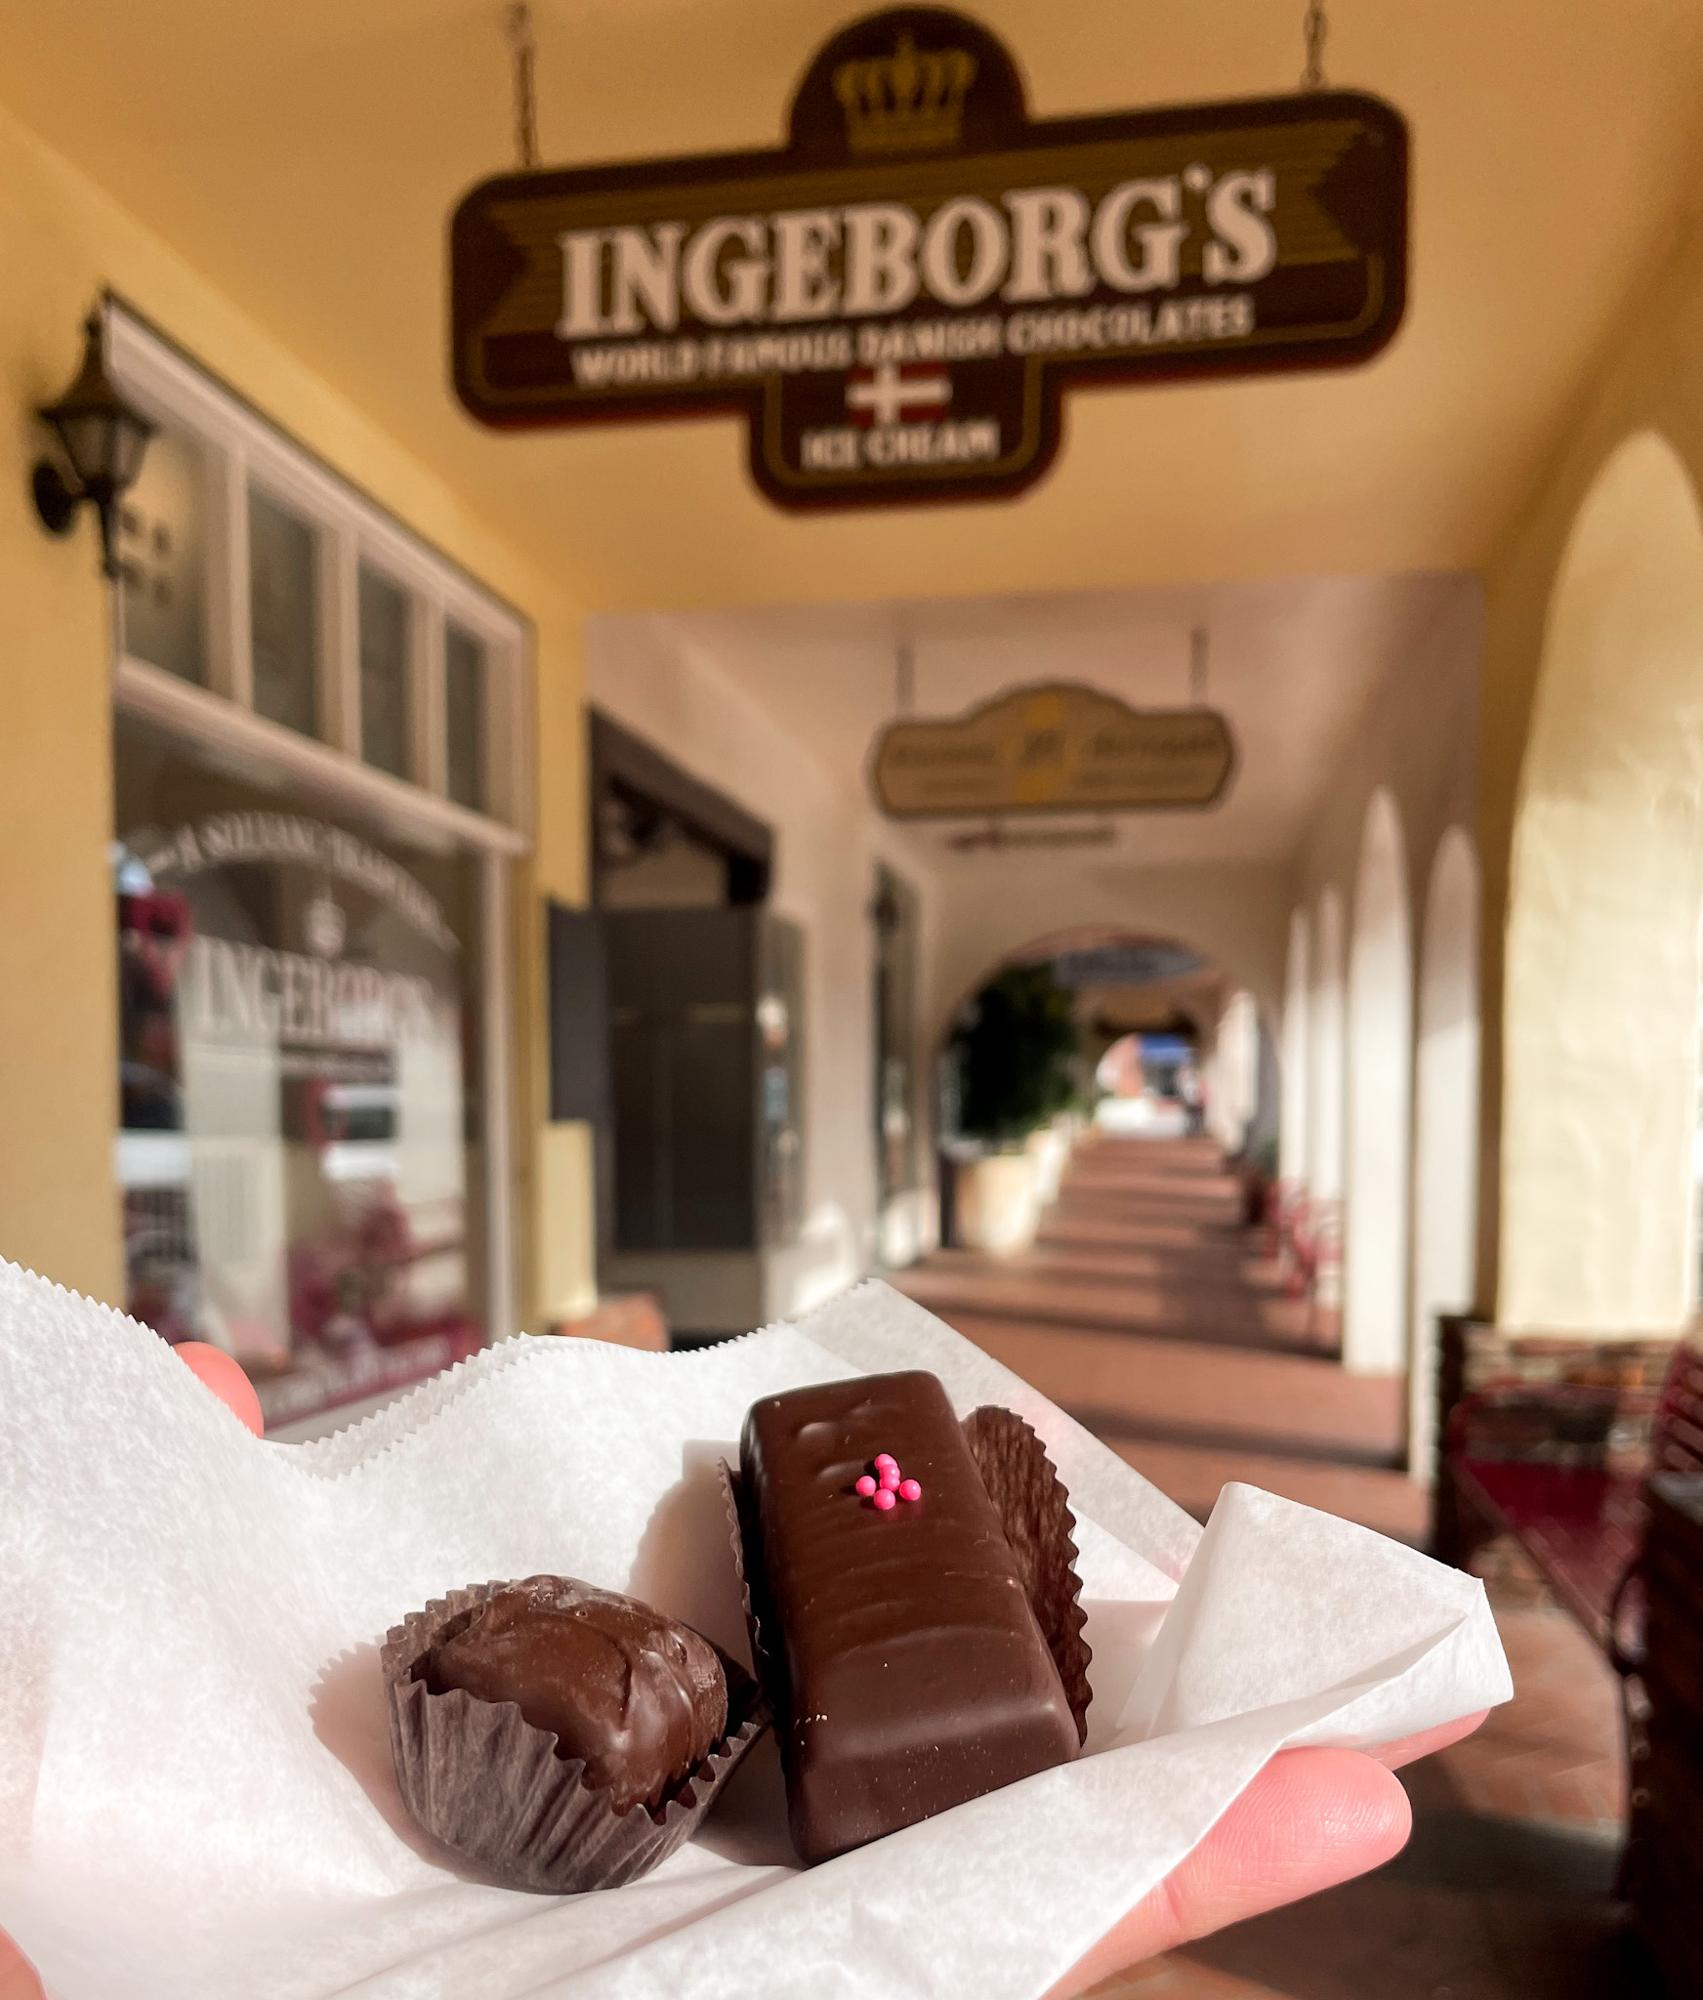 Two chocolates in hand with the Ingeborg's Chocolate sign in the background